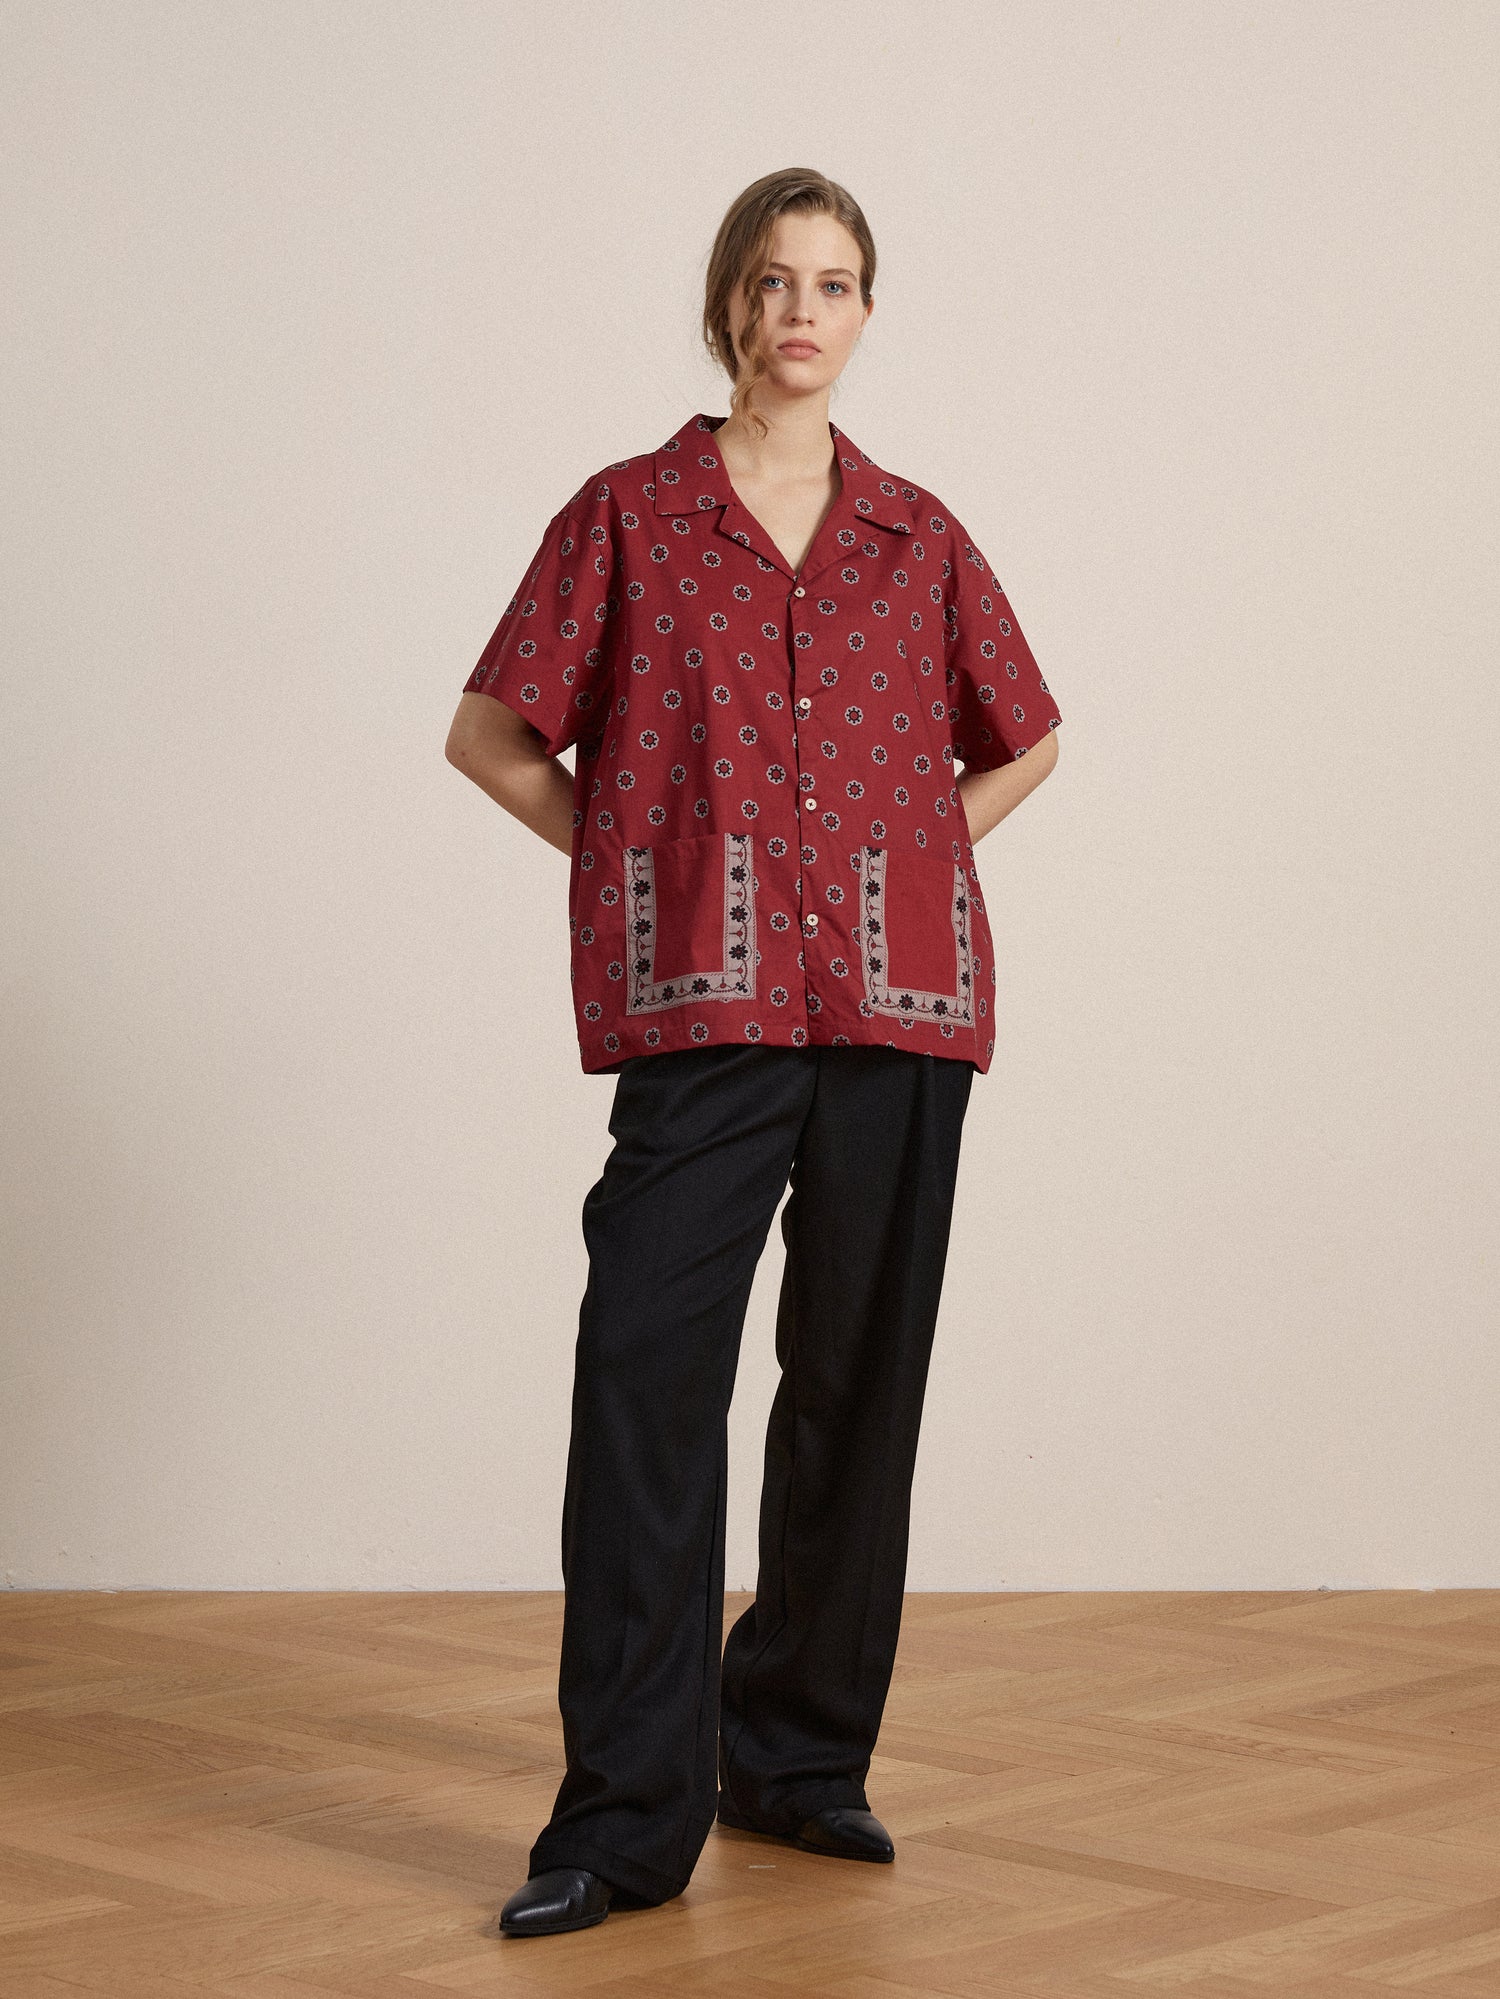 A woman wearing a Found Red Motif SS Camp Shirt and black pants.